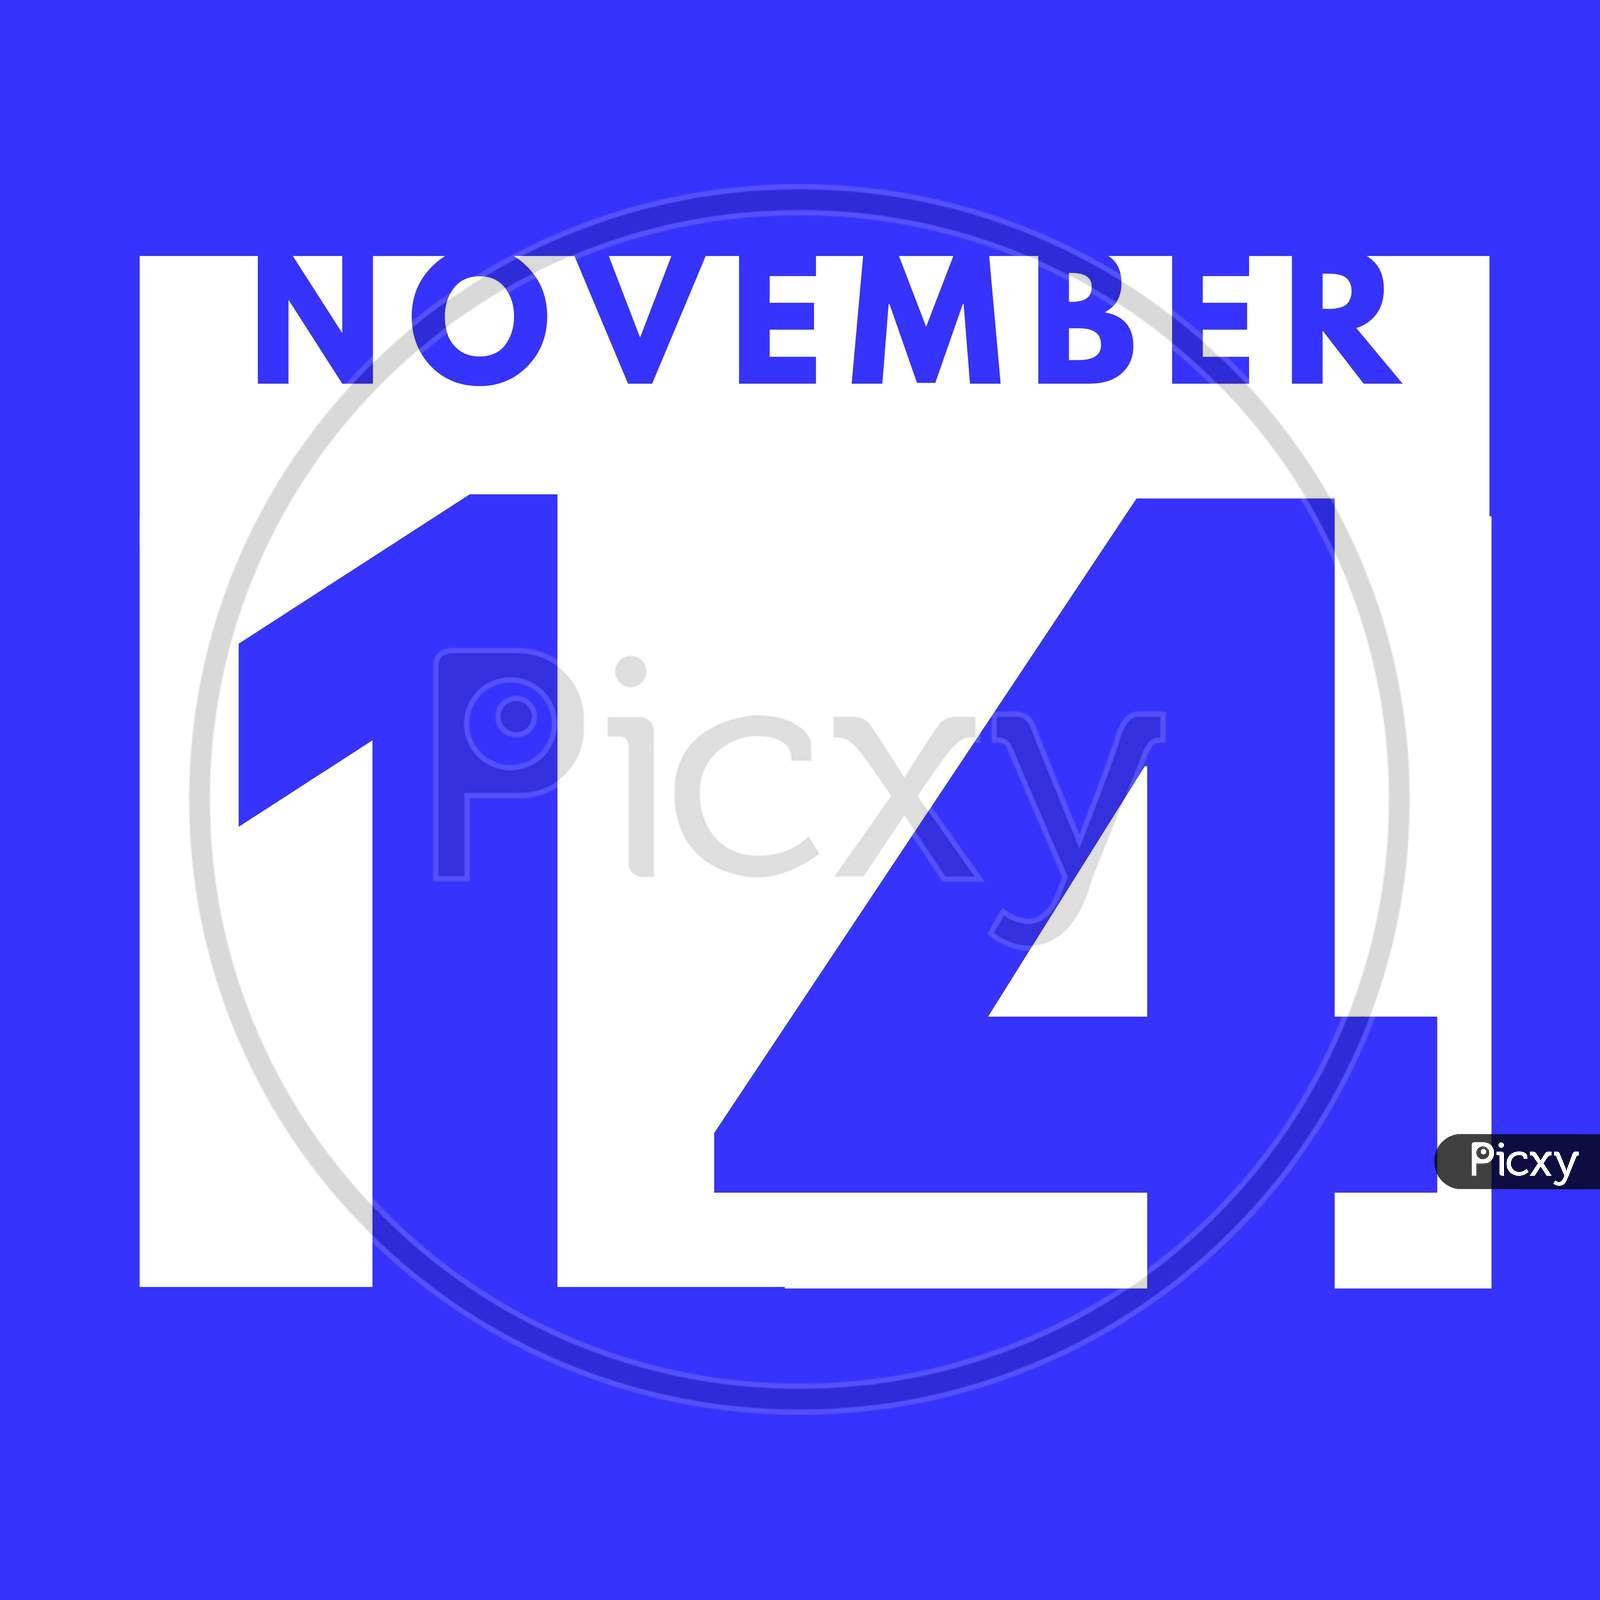 November 14 . Flat Modern Daily Calendar Icon .Date ,Day, Month .Calendar For The Month Of November